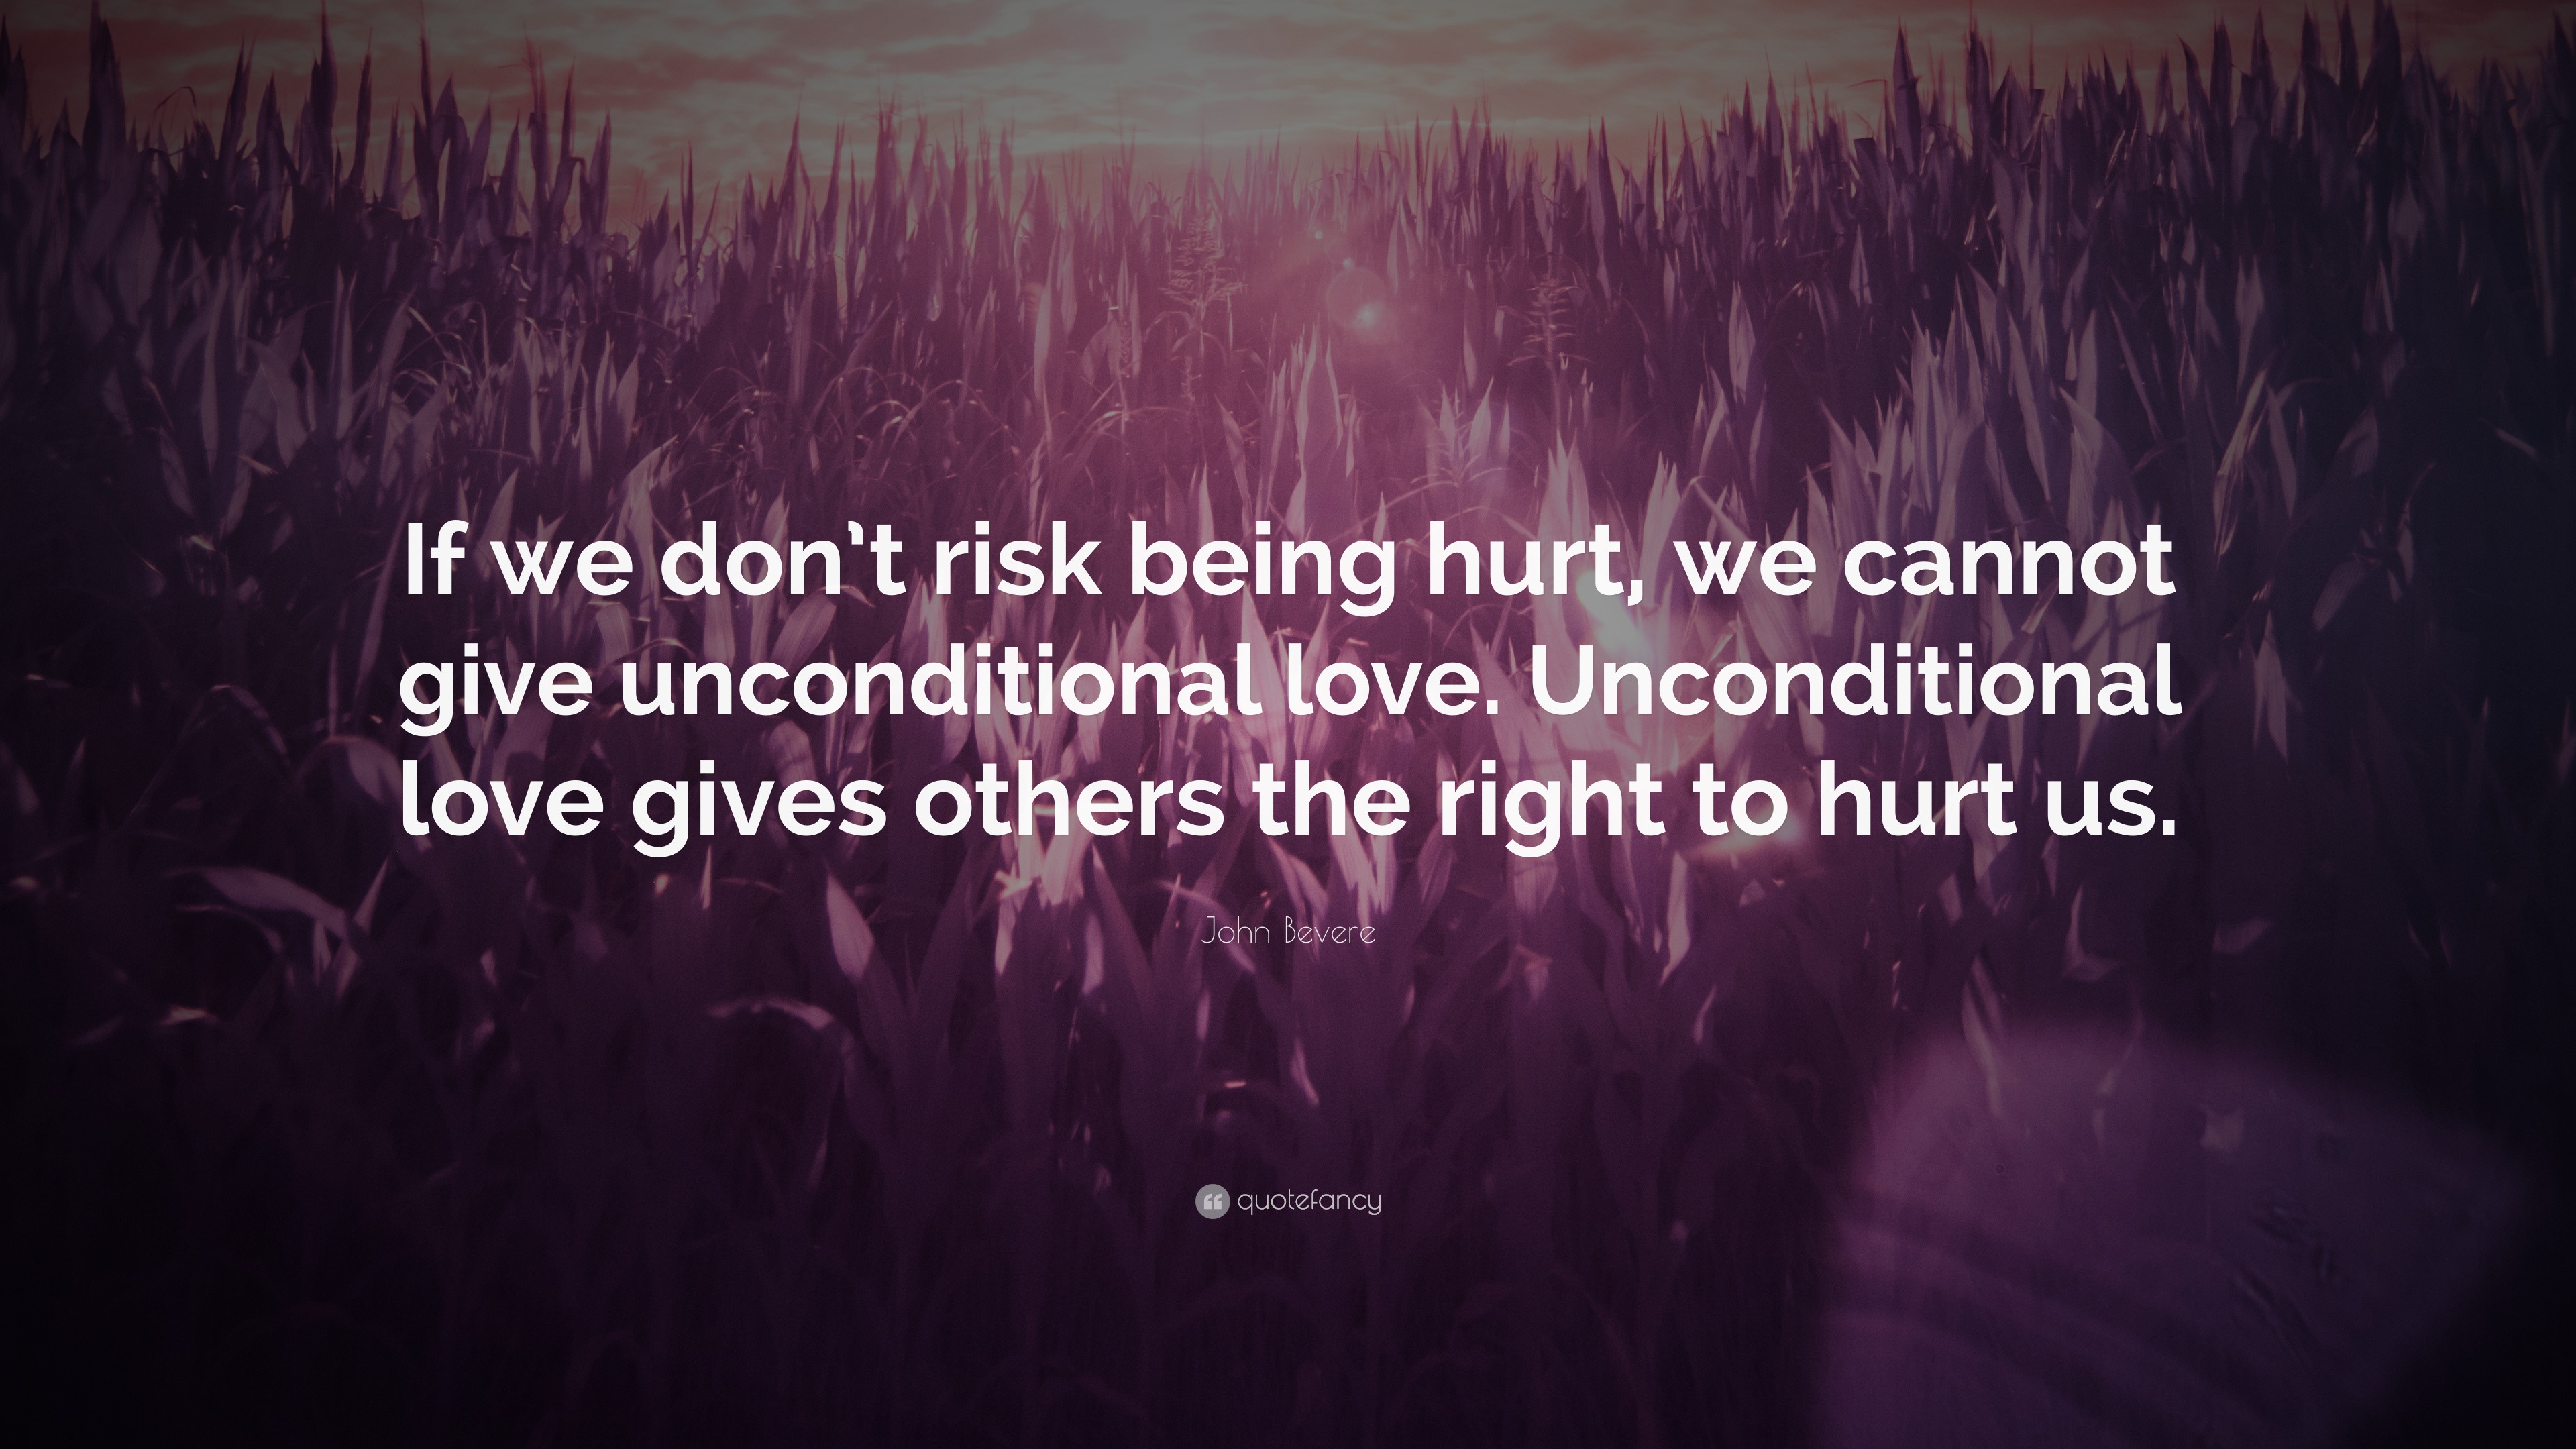 John Bevere Quote “If we don t risk being hurt we cannot